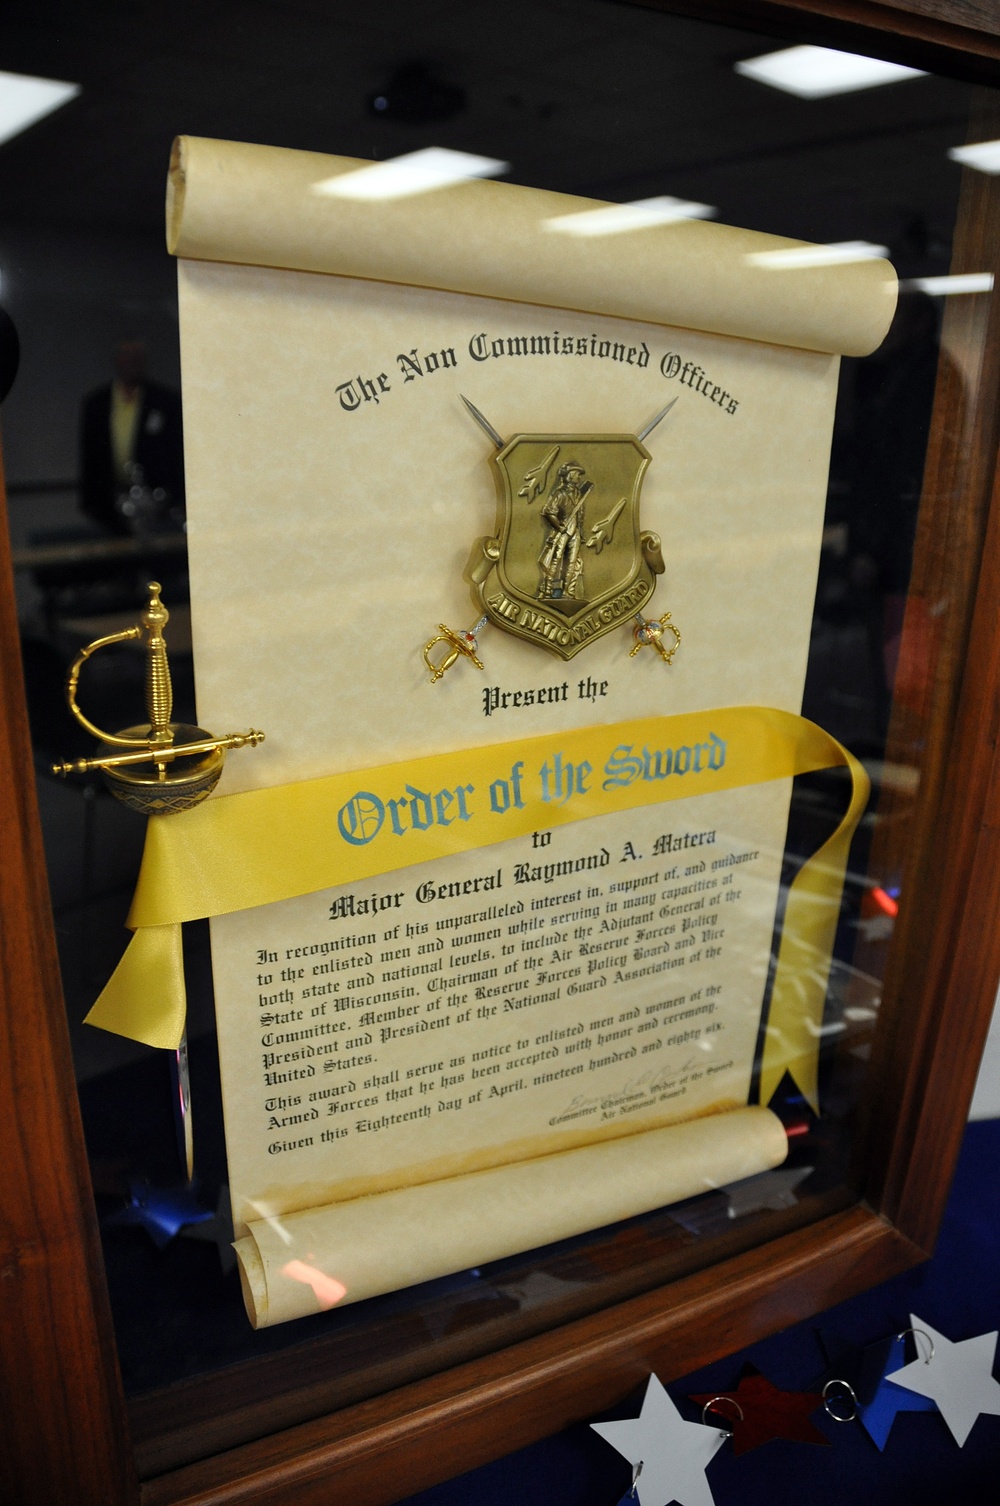 Retired adjutant general's Order of the Sword on display at Wisconsin Department of Military Affairs